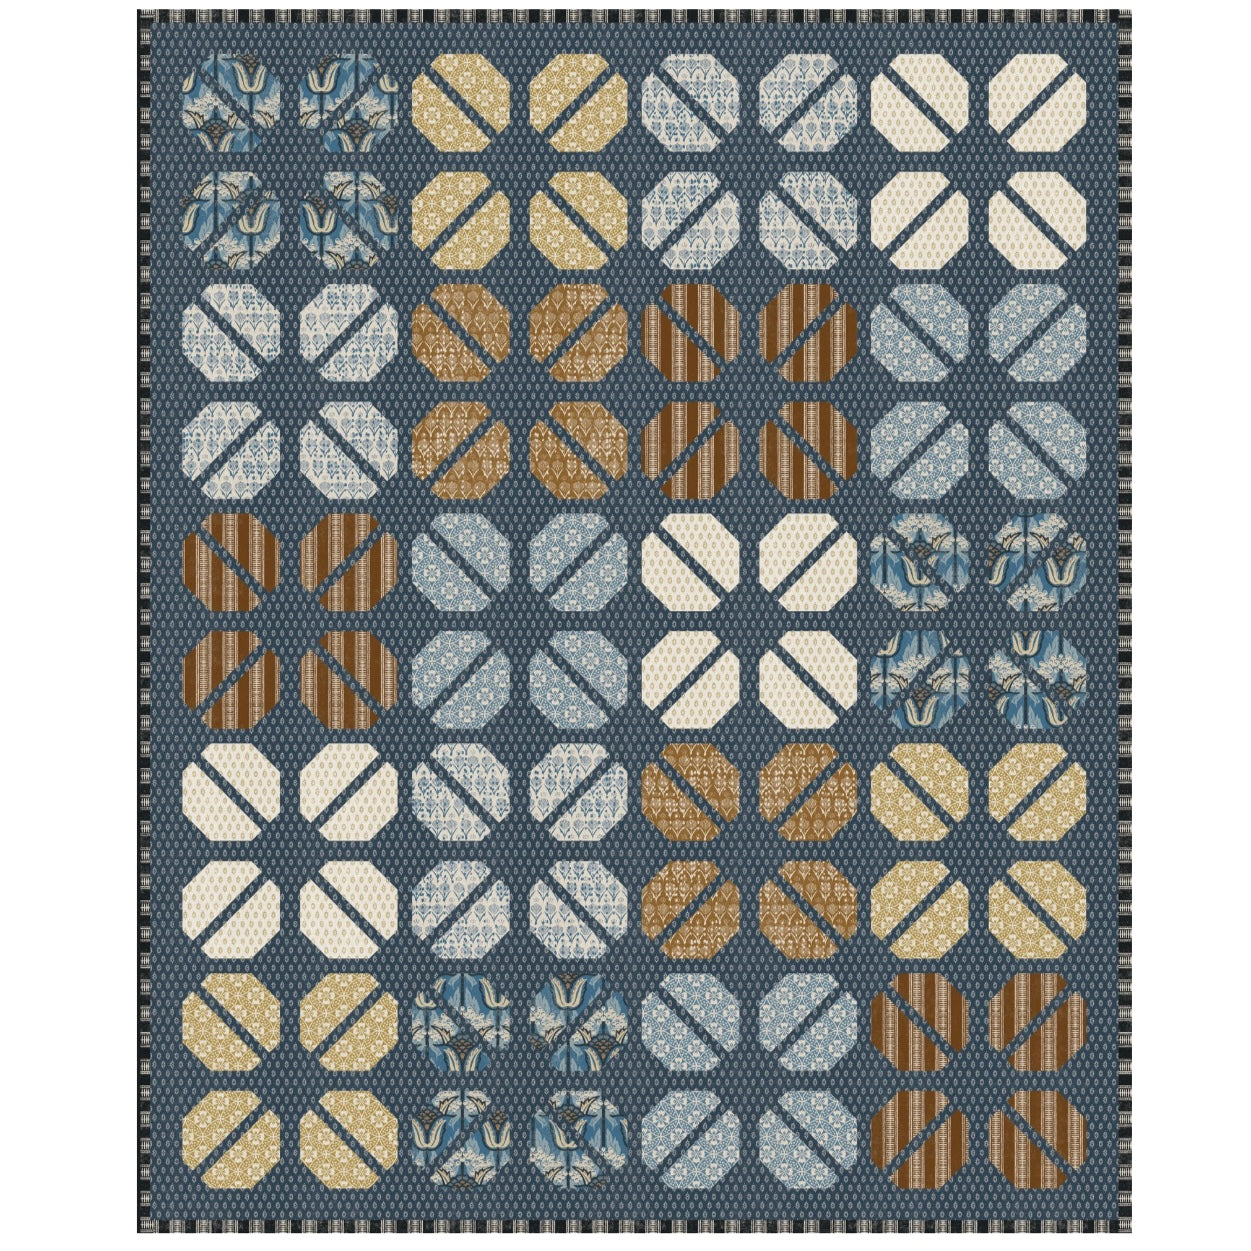 Corolla Quilt Kit featuring Wabi by Holli Zollinger